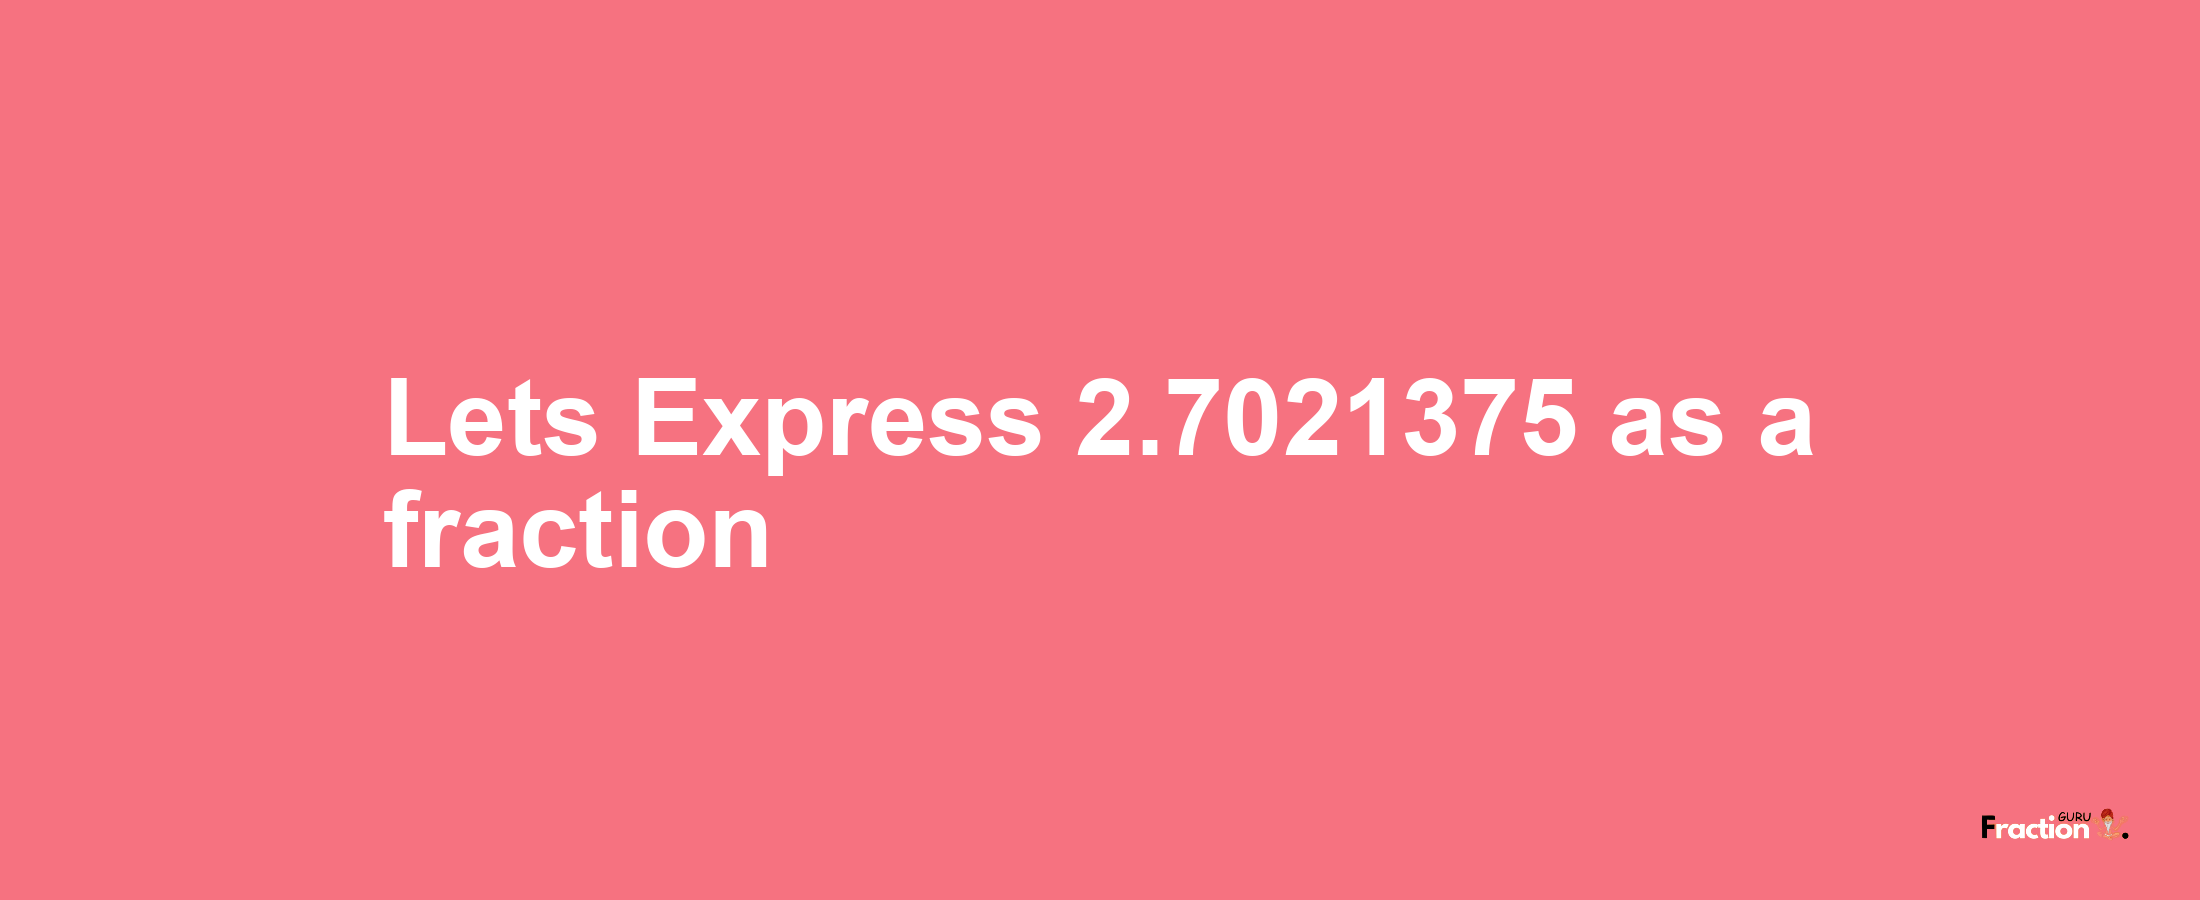 Lets Express 2.7021375 as afraction